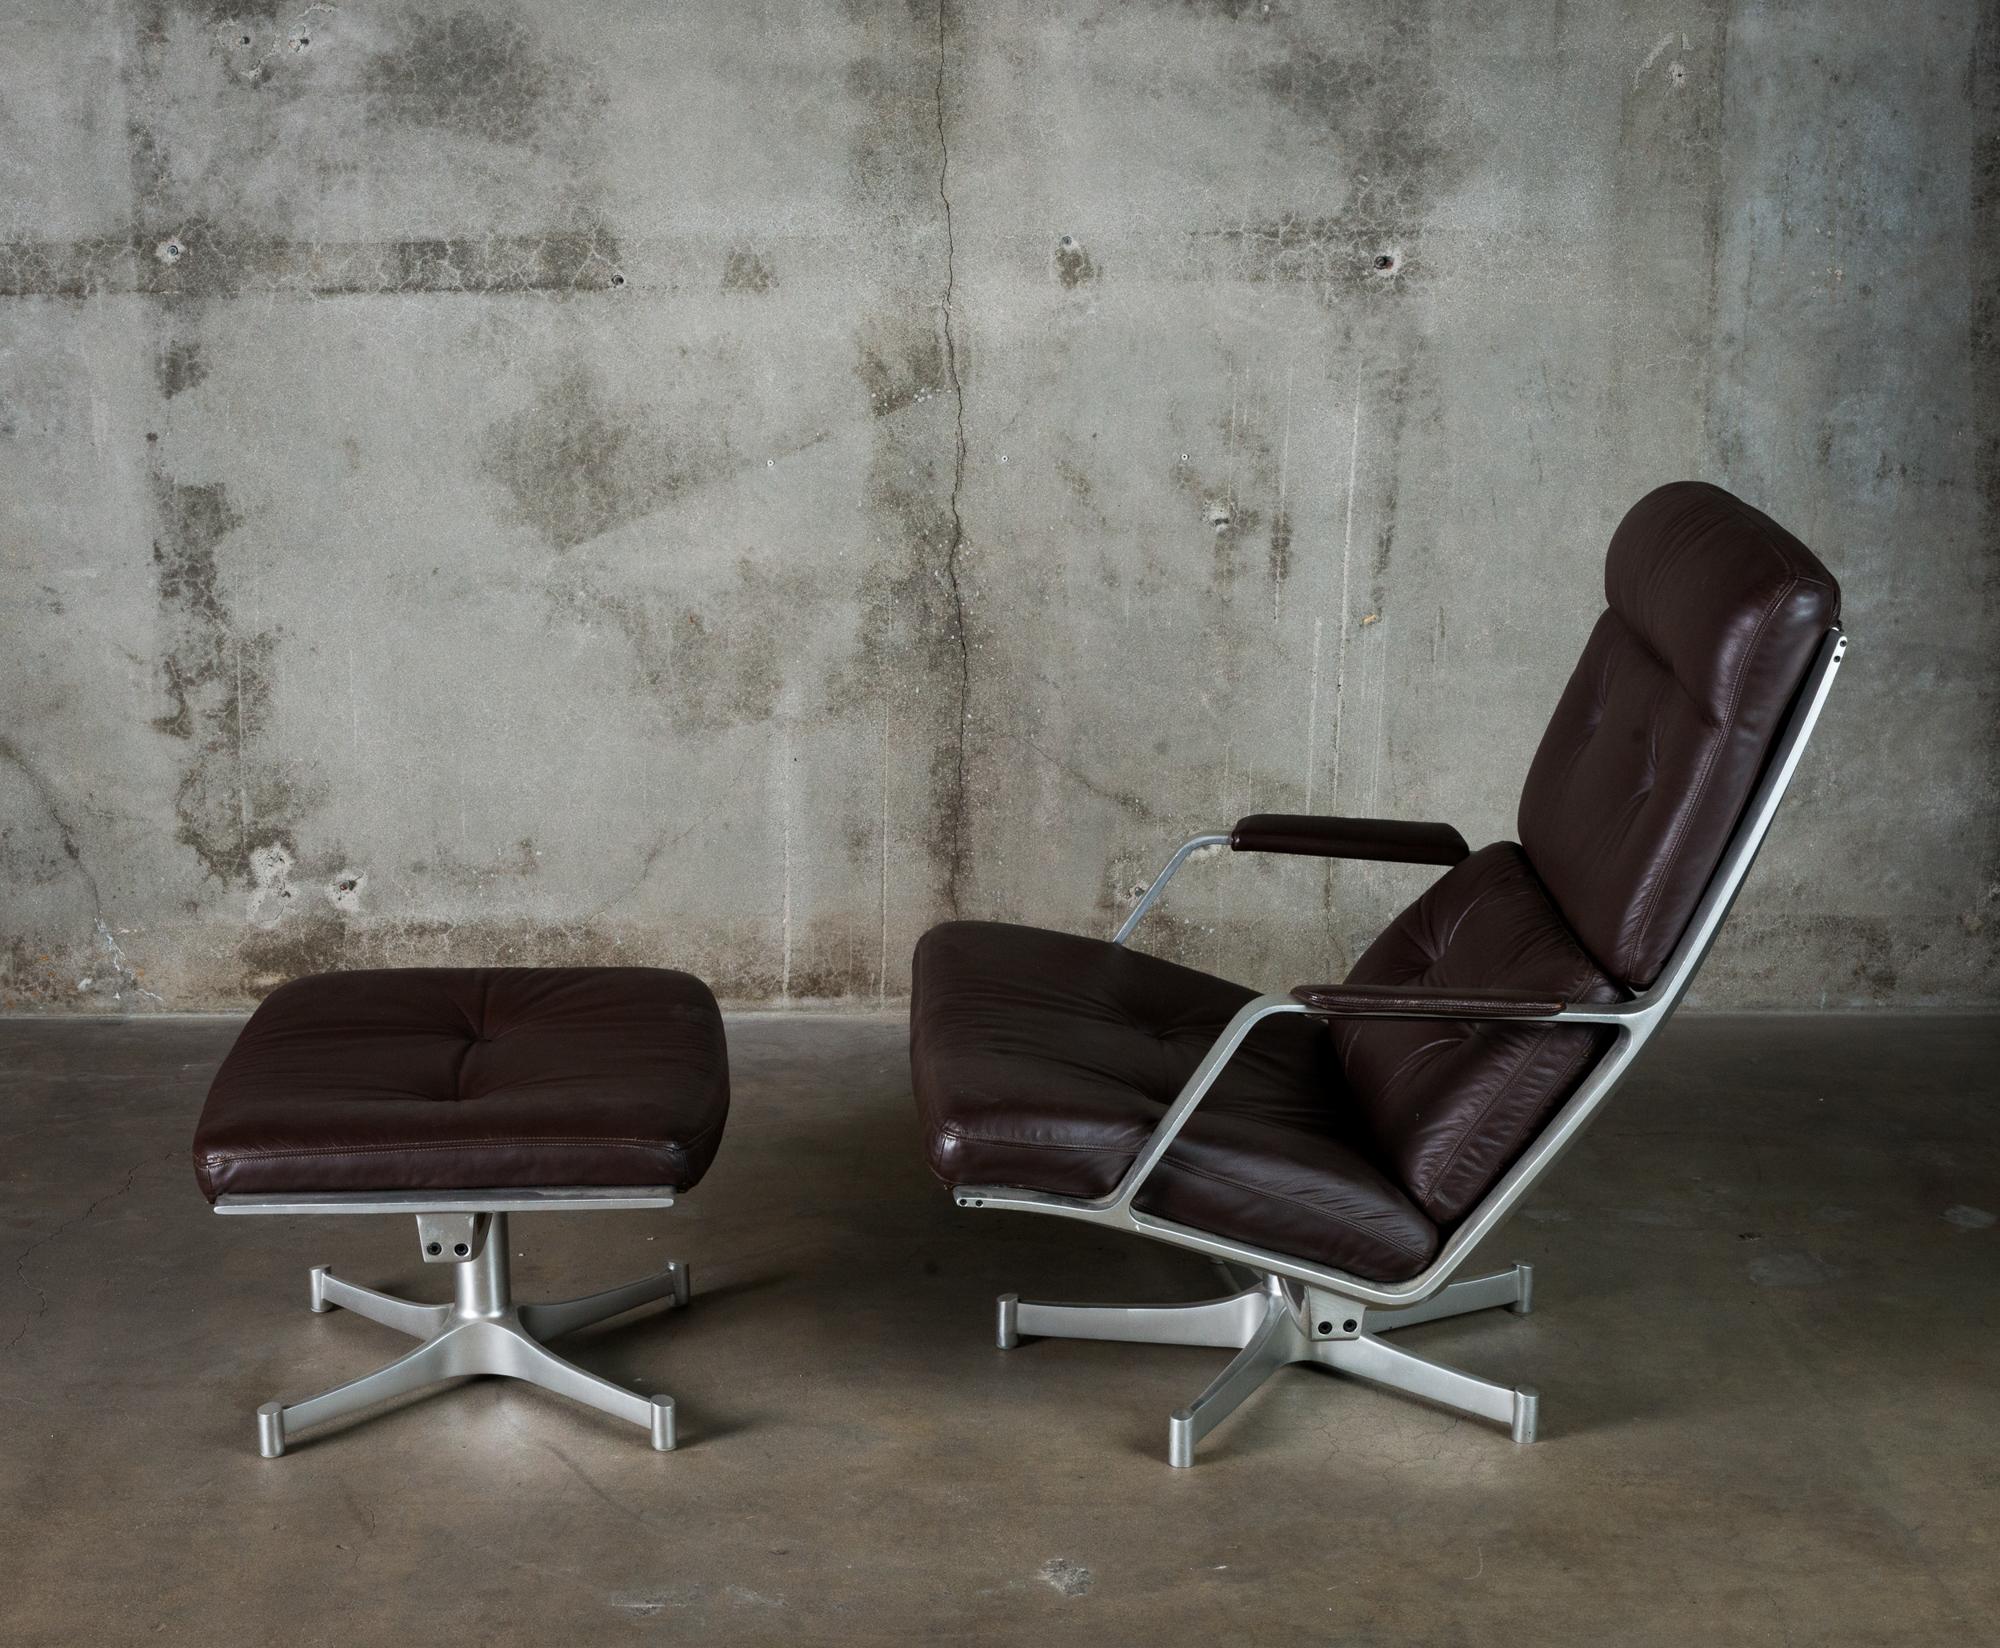 A Preben Fabricius & Jorgen Kastholm leather and aluminium lounge chair with ottoman, from Denmark, 1968.